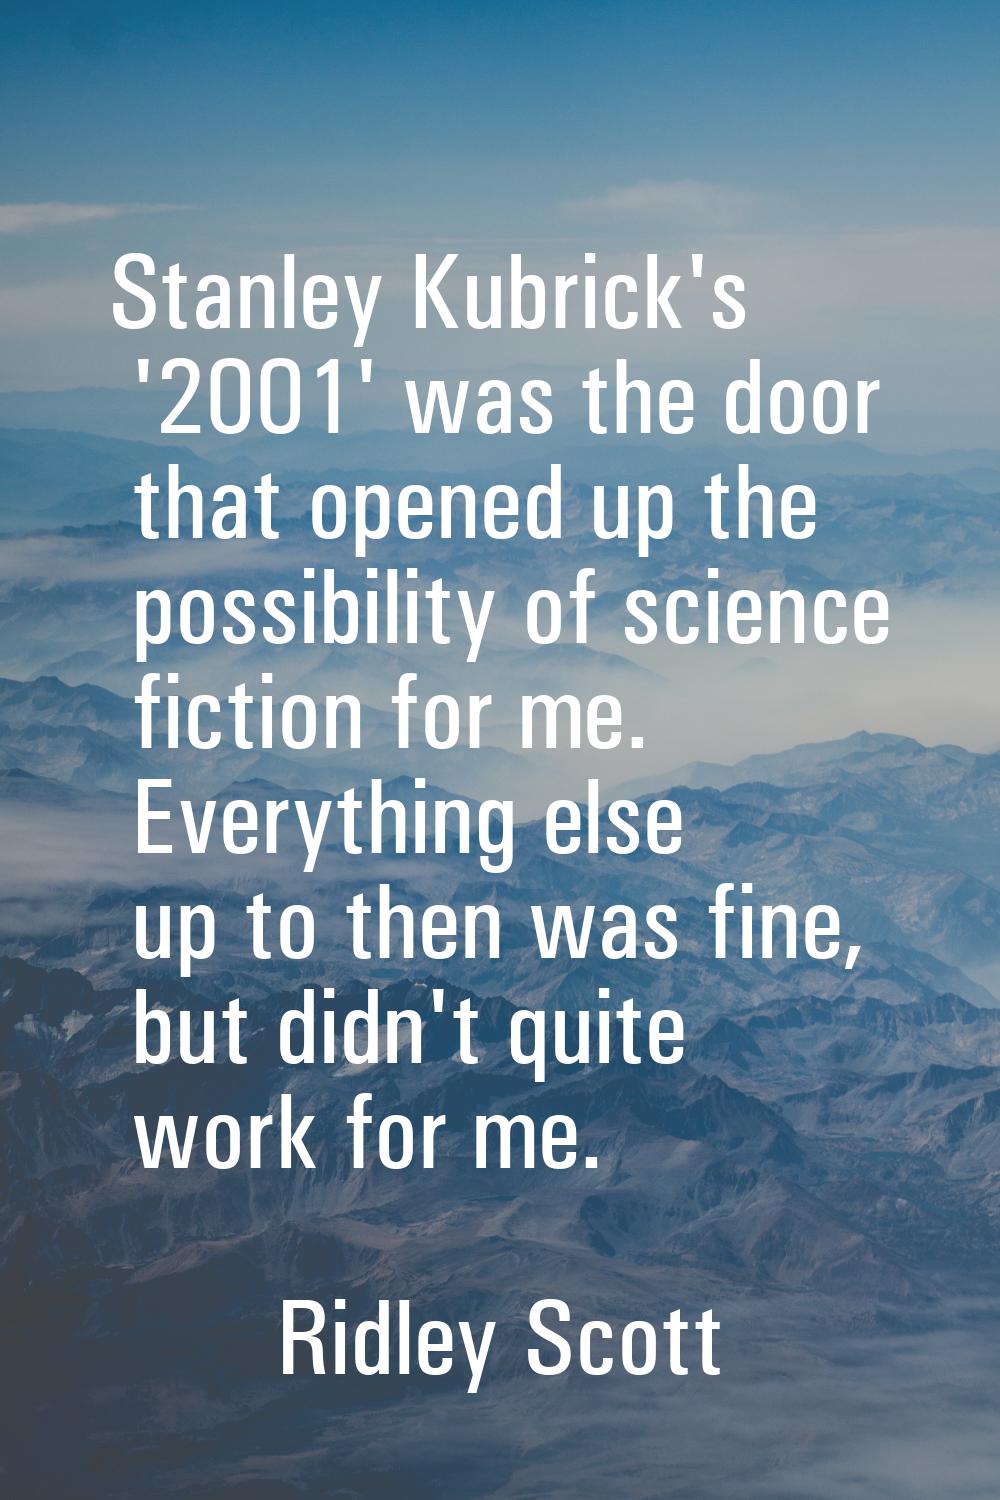 Stanley Kubrick's '2001' was the door that opened up the possibility of science fiction for me. Eve